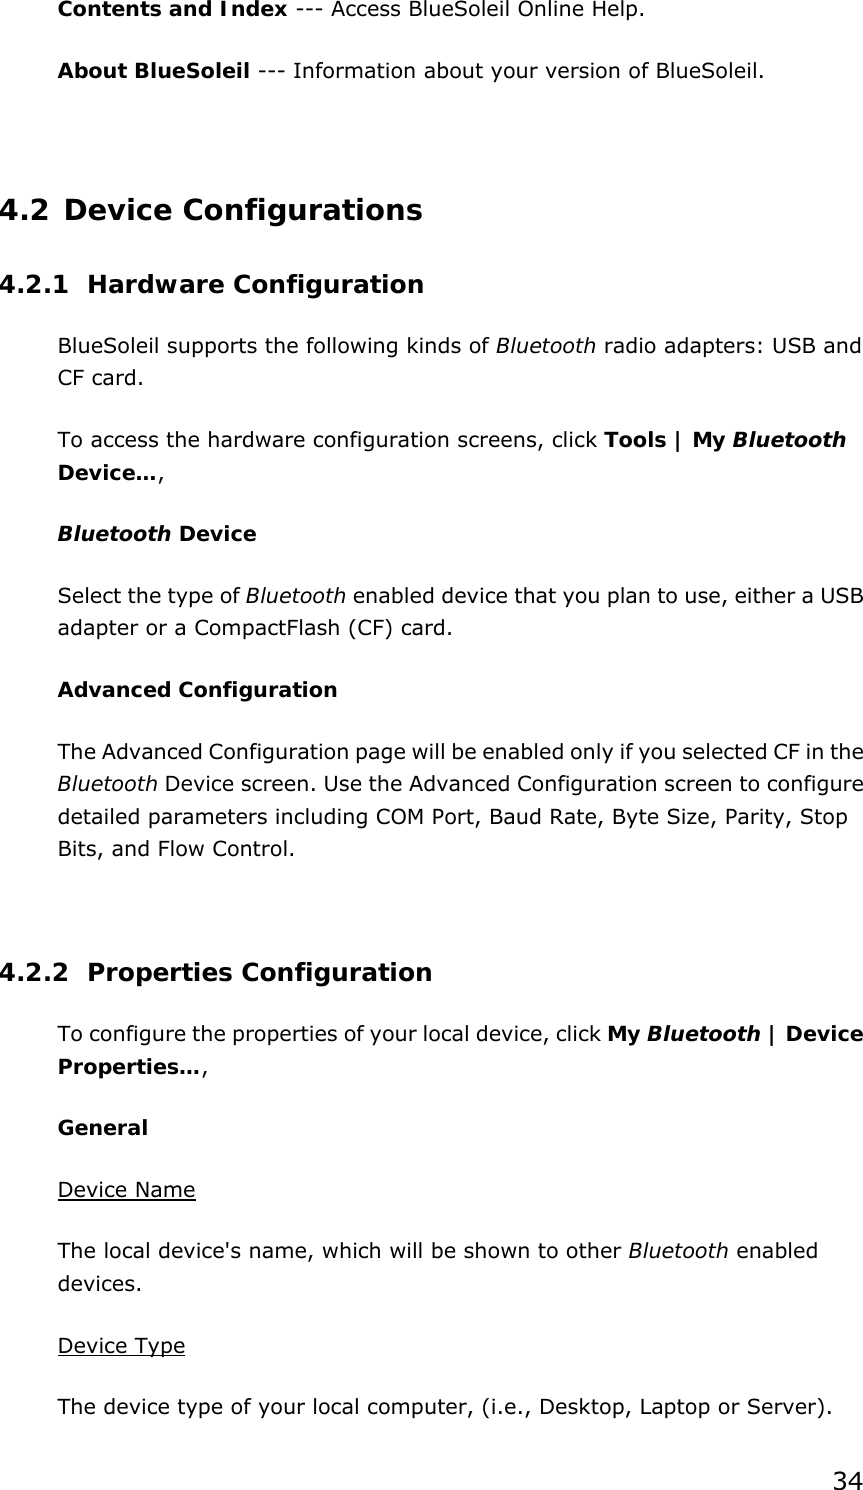 34 Contents and Index --- Access BlueSoleil Online Help.   About BlueSoleil --- Information about your version of BlueSoleil.    4.2 Device Configurations 4.2.1 Hardware Configuration  BlueSoleil supports the following kinds of Bluetooth radio adapters: USB and CF card. To access the hardware configuration screens, click Tools | My Bluetooth Device…,  Bluetooth Device Select the type of Bluetooth enabled device that you plan to use, either a USB adapter or a CompactFlash (CF) card. Advanced Configuration The Advanced Configuration page will be enabled only if you selected CF in the Bluetooth Device screen. Use the Advanced Configuration screen to configure detailed parameters including COM Port, Baud Rate, Byte Size, Parity, Stop Bits, and Flow Control.    4.2.2 Properties Configuration To configure the properties of your local device, click My Bluetooth | Device Properties…,  General Device Name The local device&apos;s name, which will be shown to other Bluetooth enabled devices. Device Type The device type of your local computer, (i.e., Desktop, Laptop or Server). 